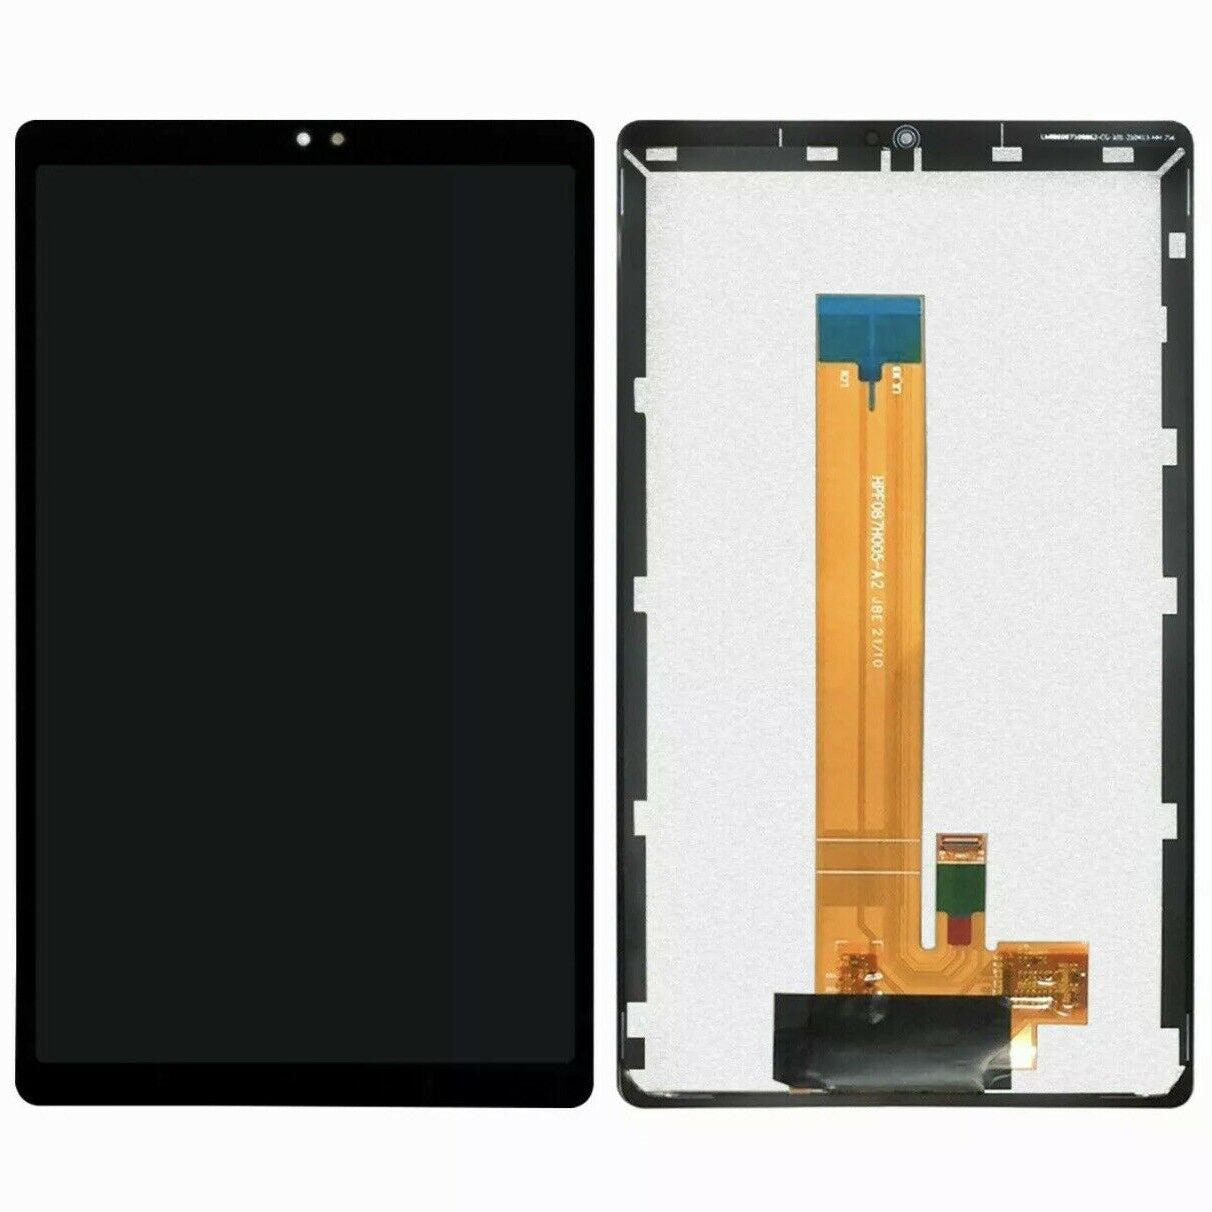 Replacement LCD For Samsung Galaxy Tab A7 Lite SM-T220 Display Touch Screen Assembly - Black-Tablet Parts-First Help Tech